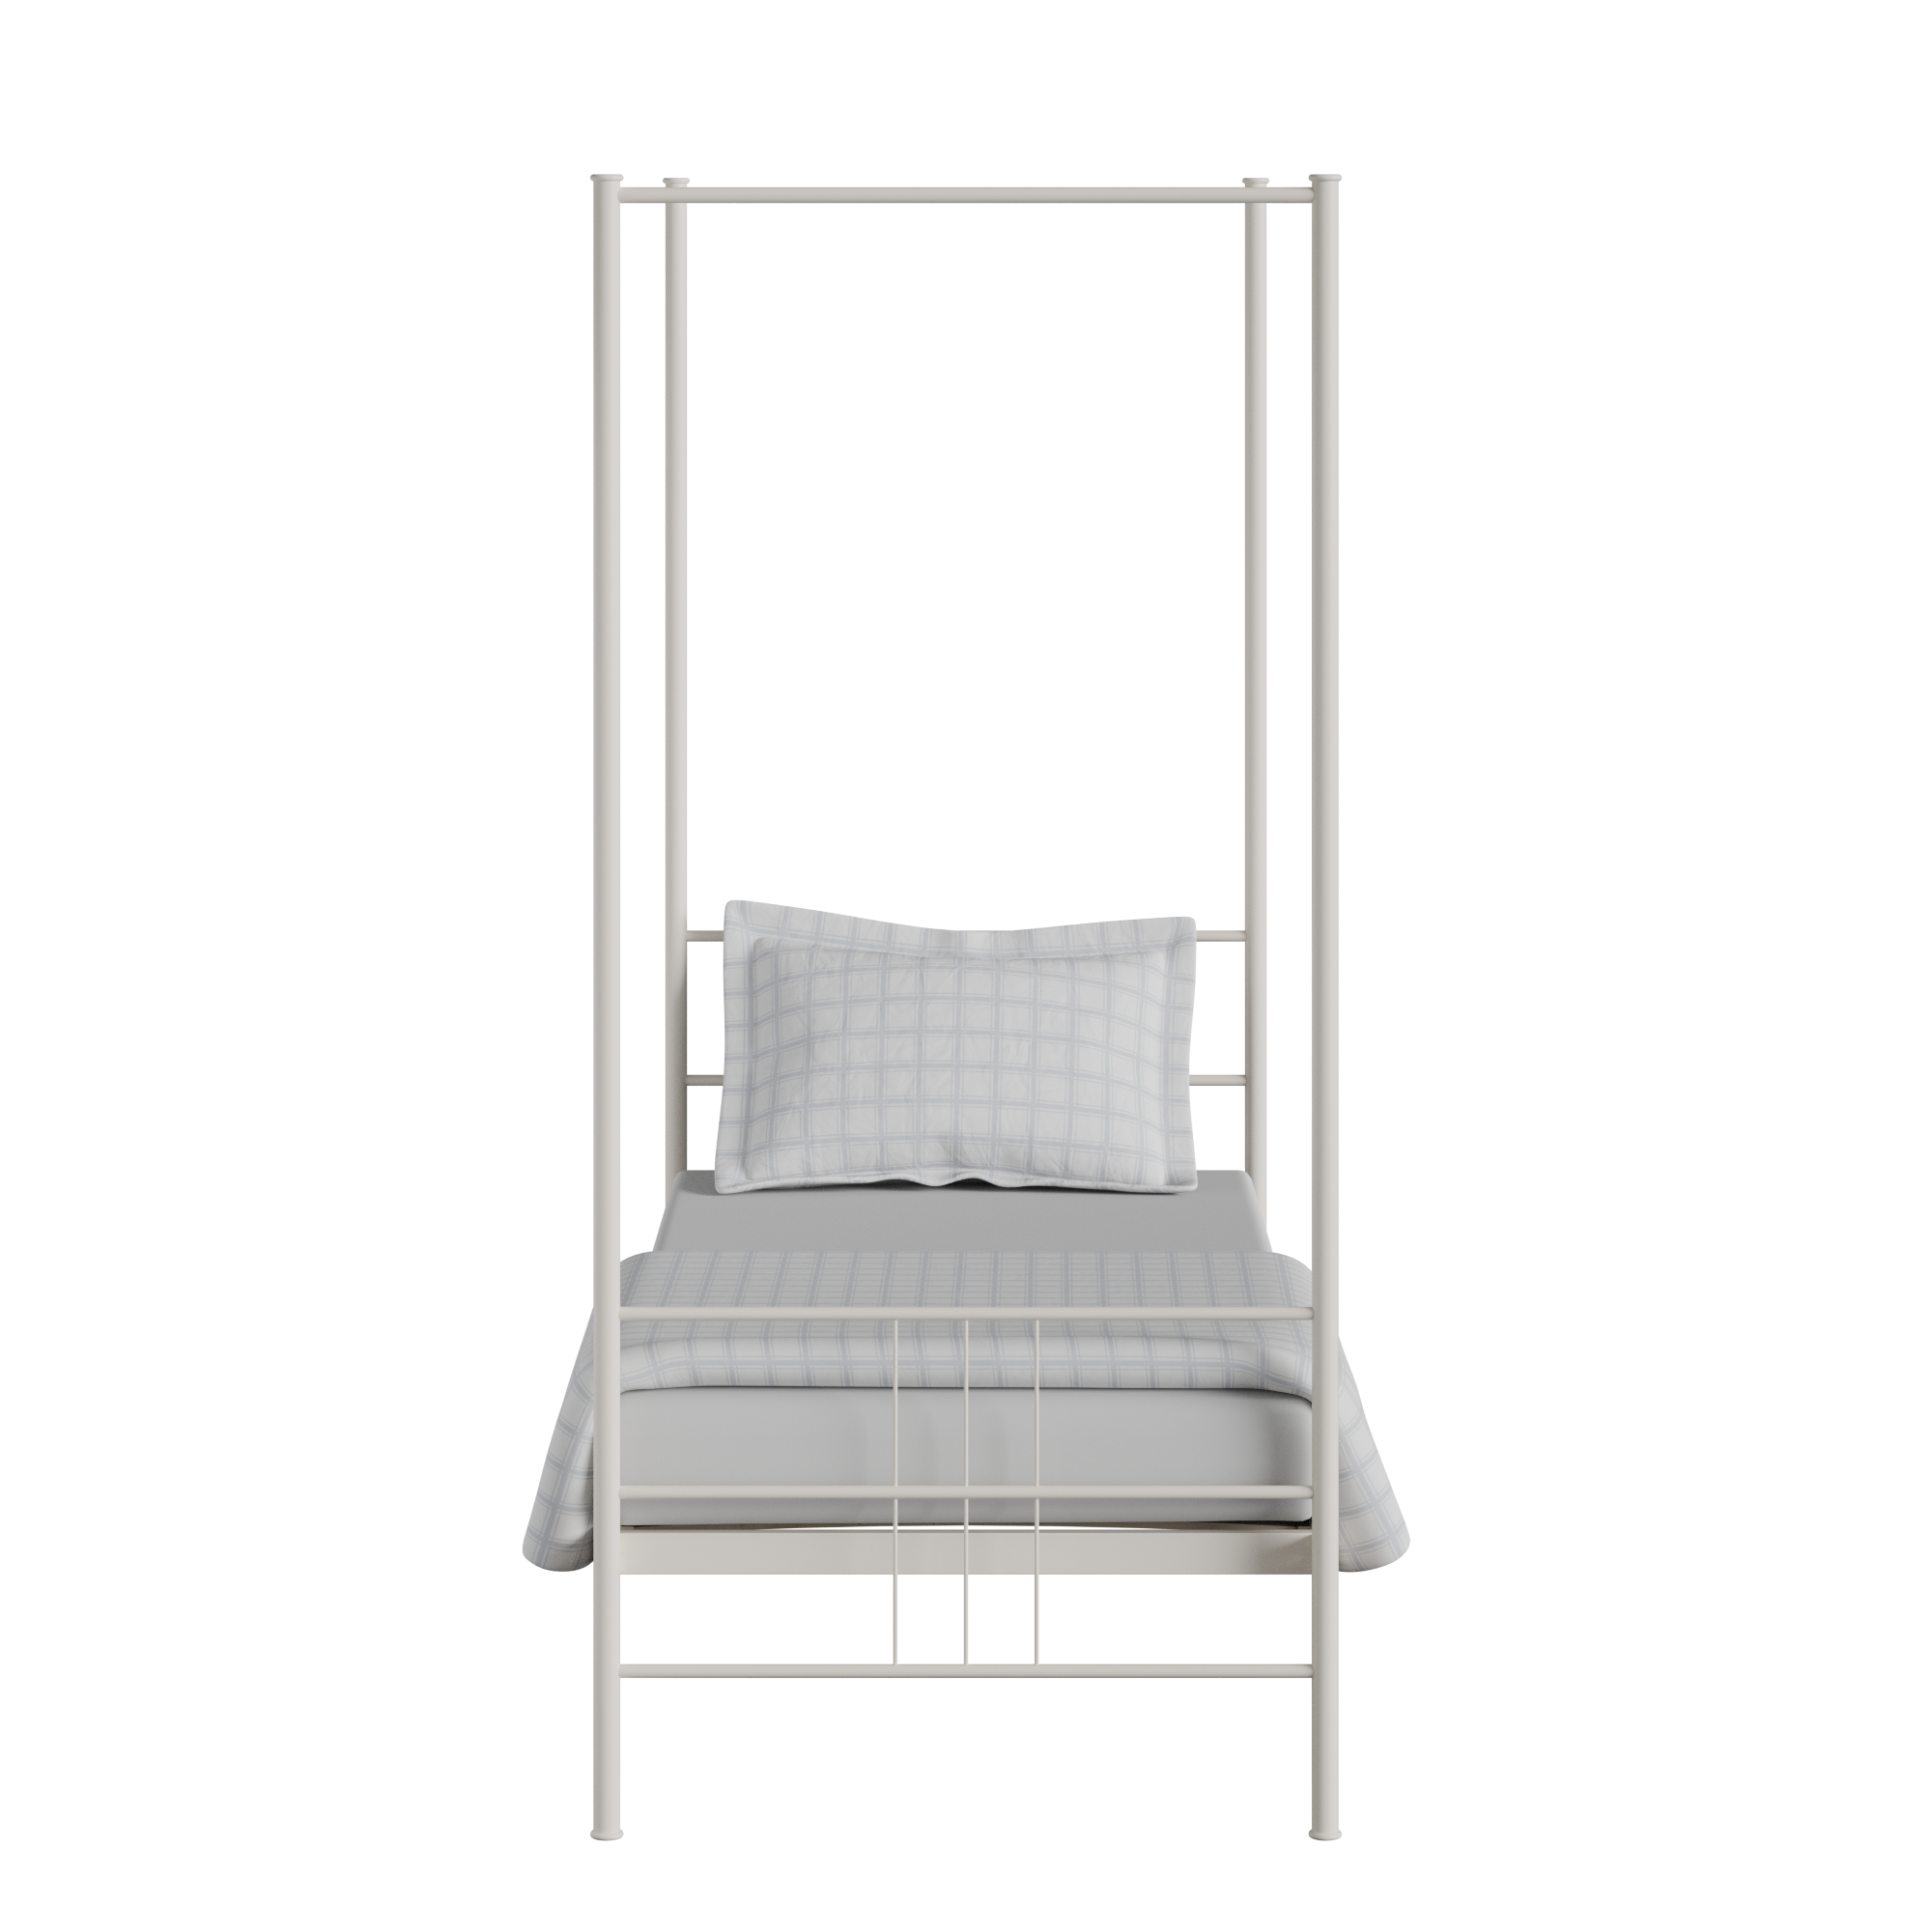 Toulon iron/metal single bed in ivory